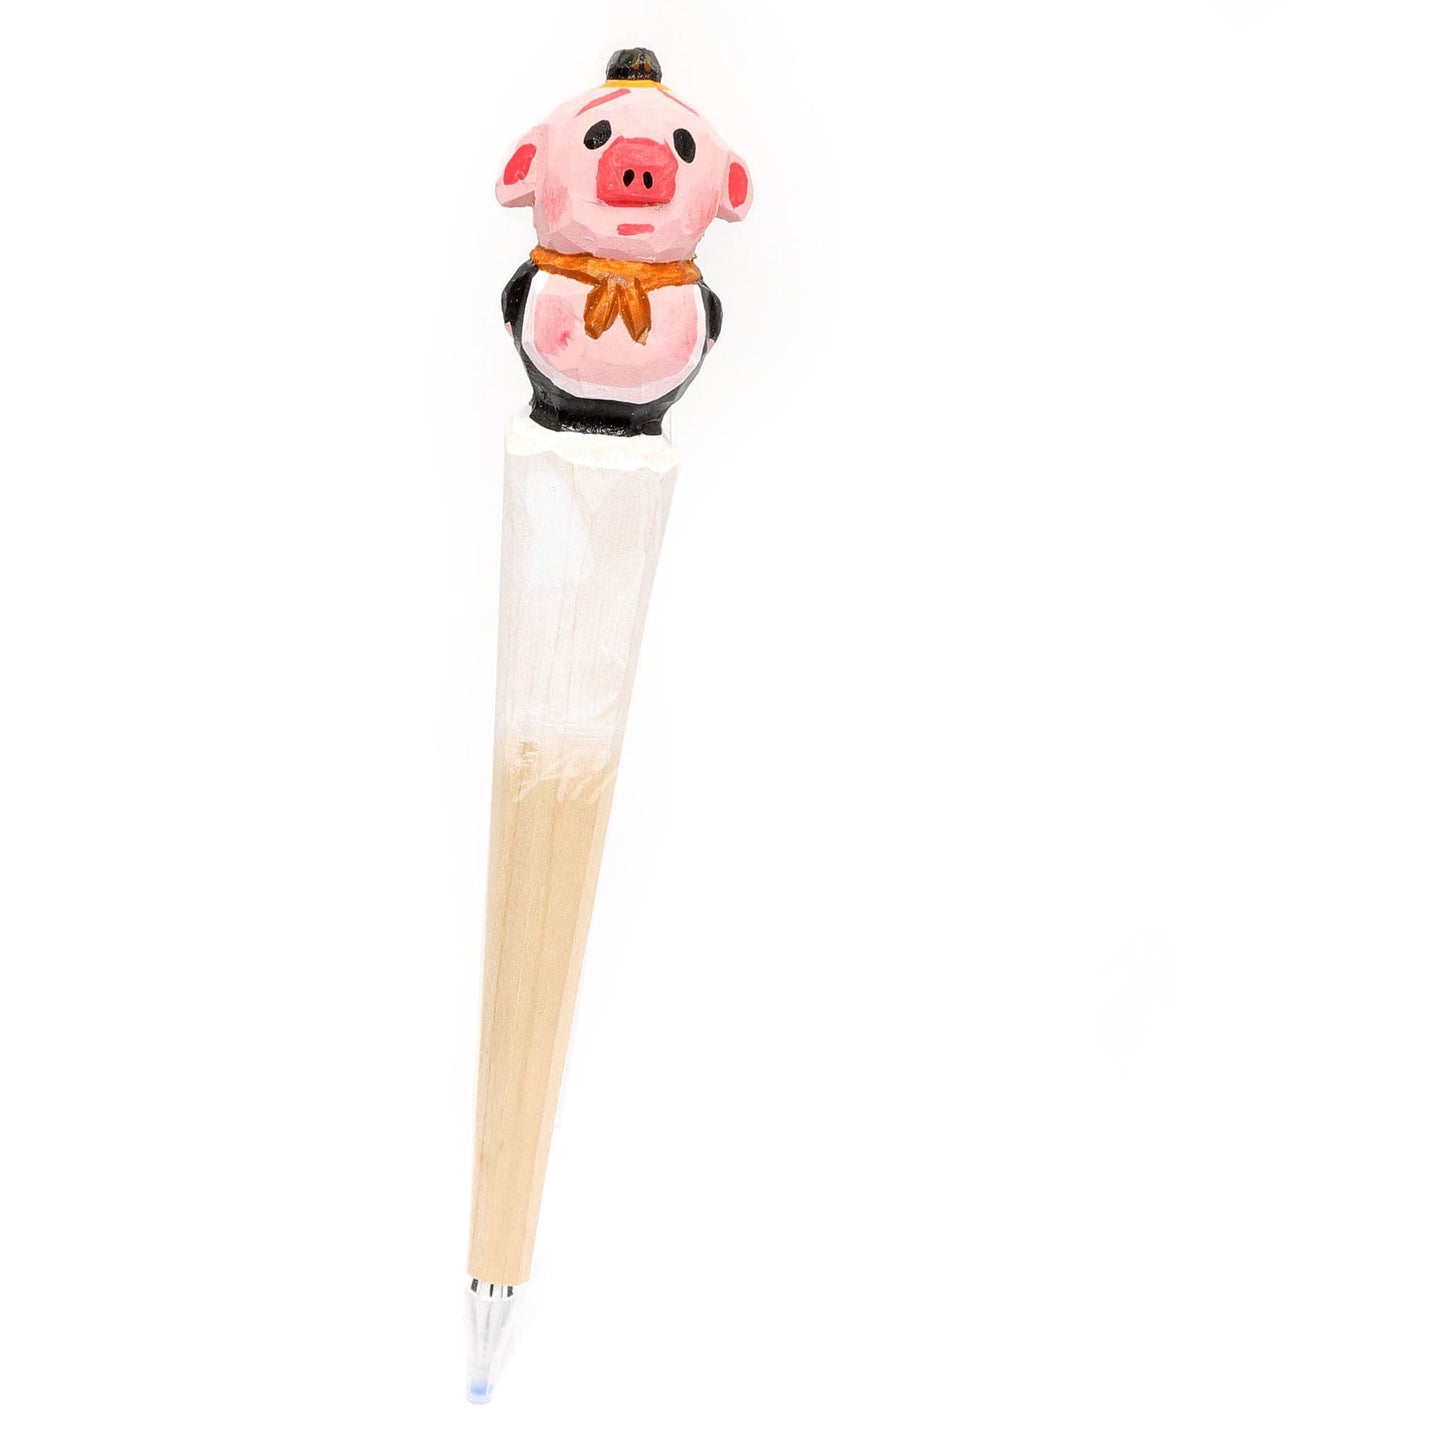 Cute wood carving drill pen, wood carving pen craft gift ktclubs.com